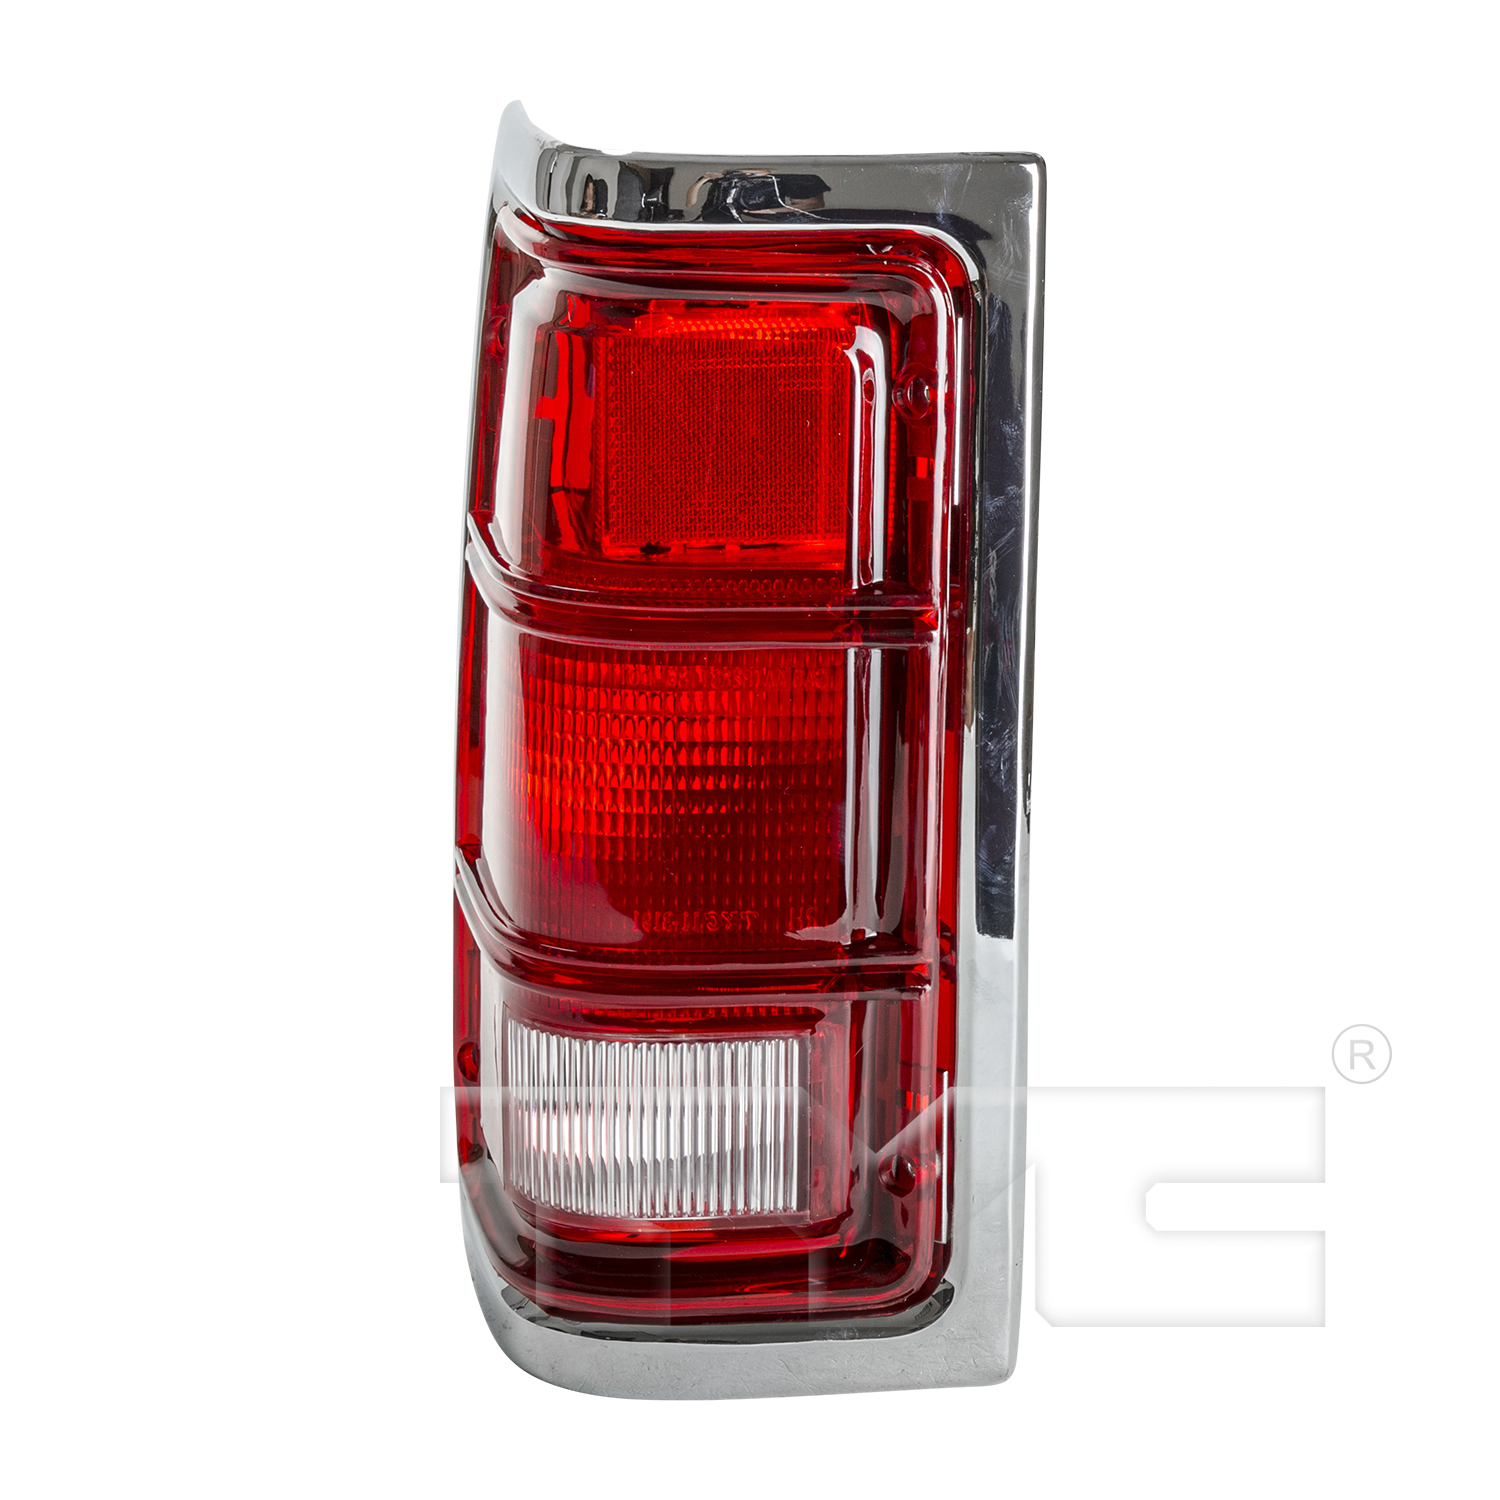 Aftermarket TAILLIGHTS for DODGE - W150, W150,92-93,LT Taillamp lens